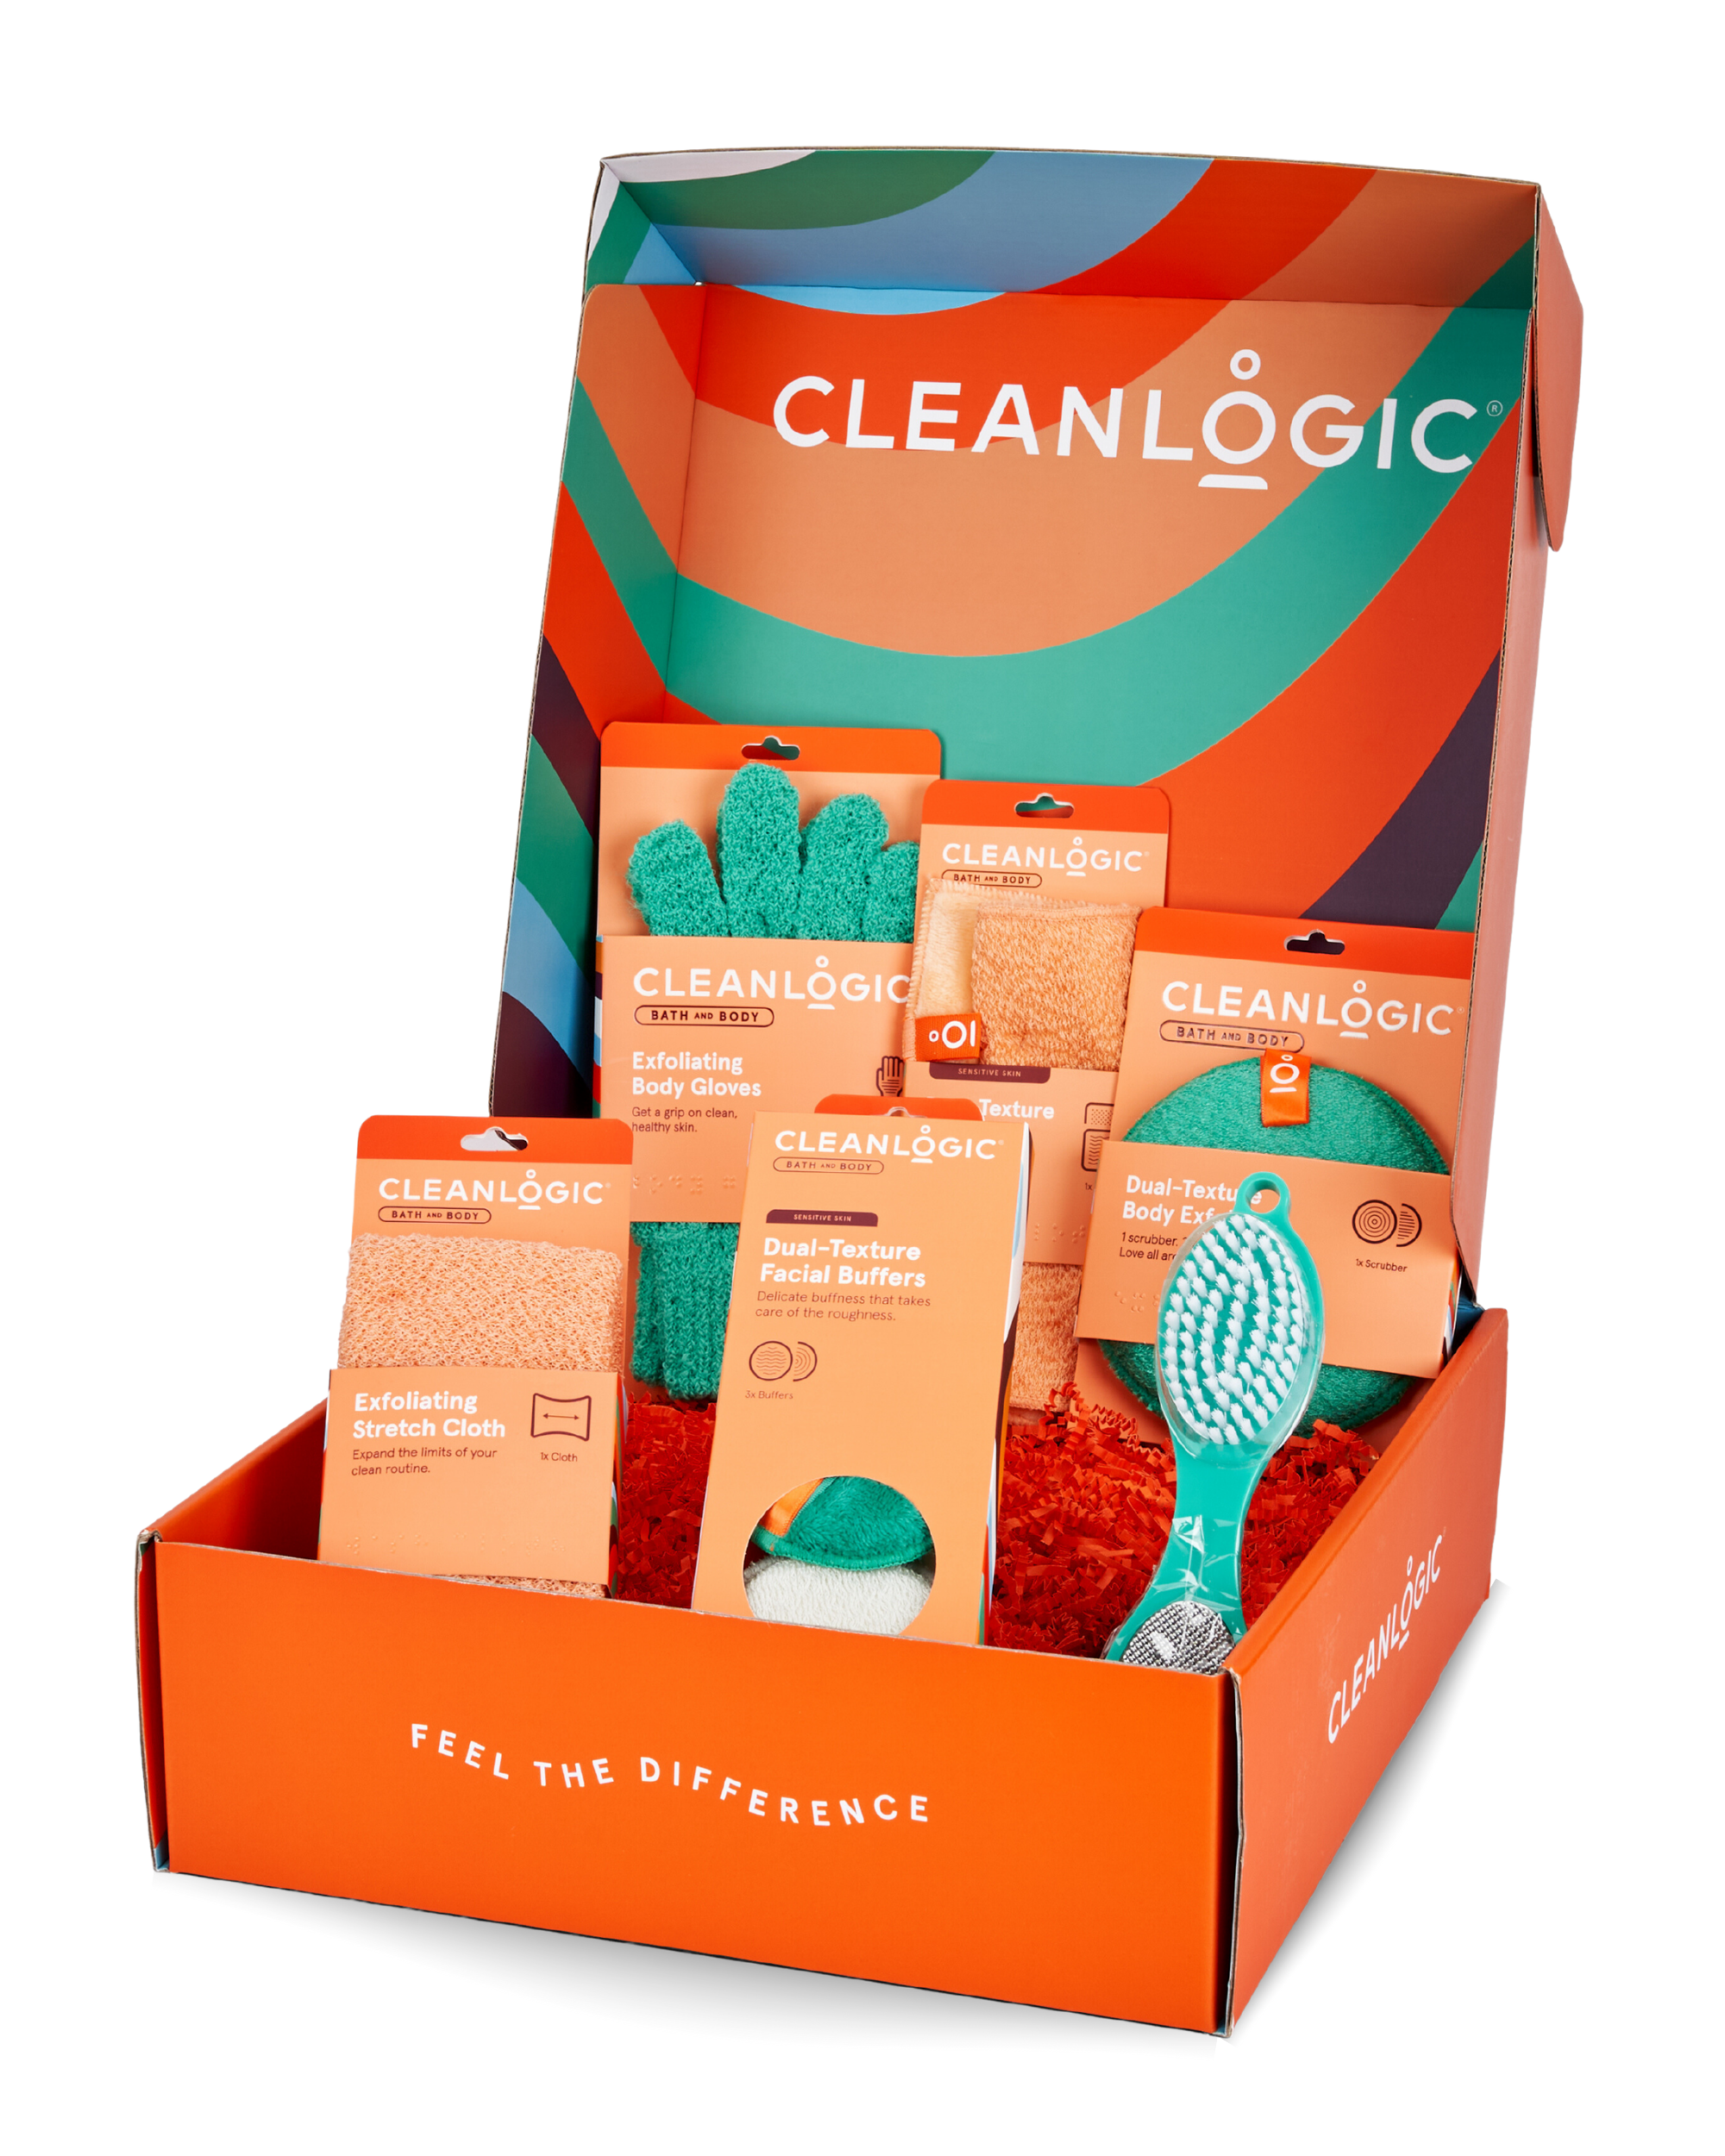 Cleanlogic Deluxe Exfoliation Gift Set